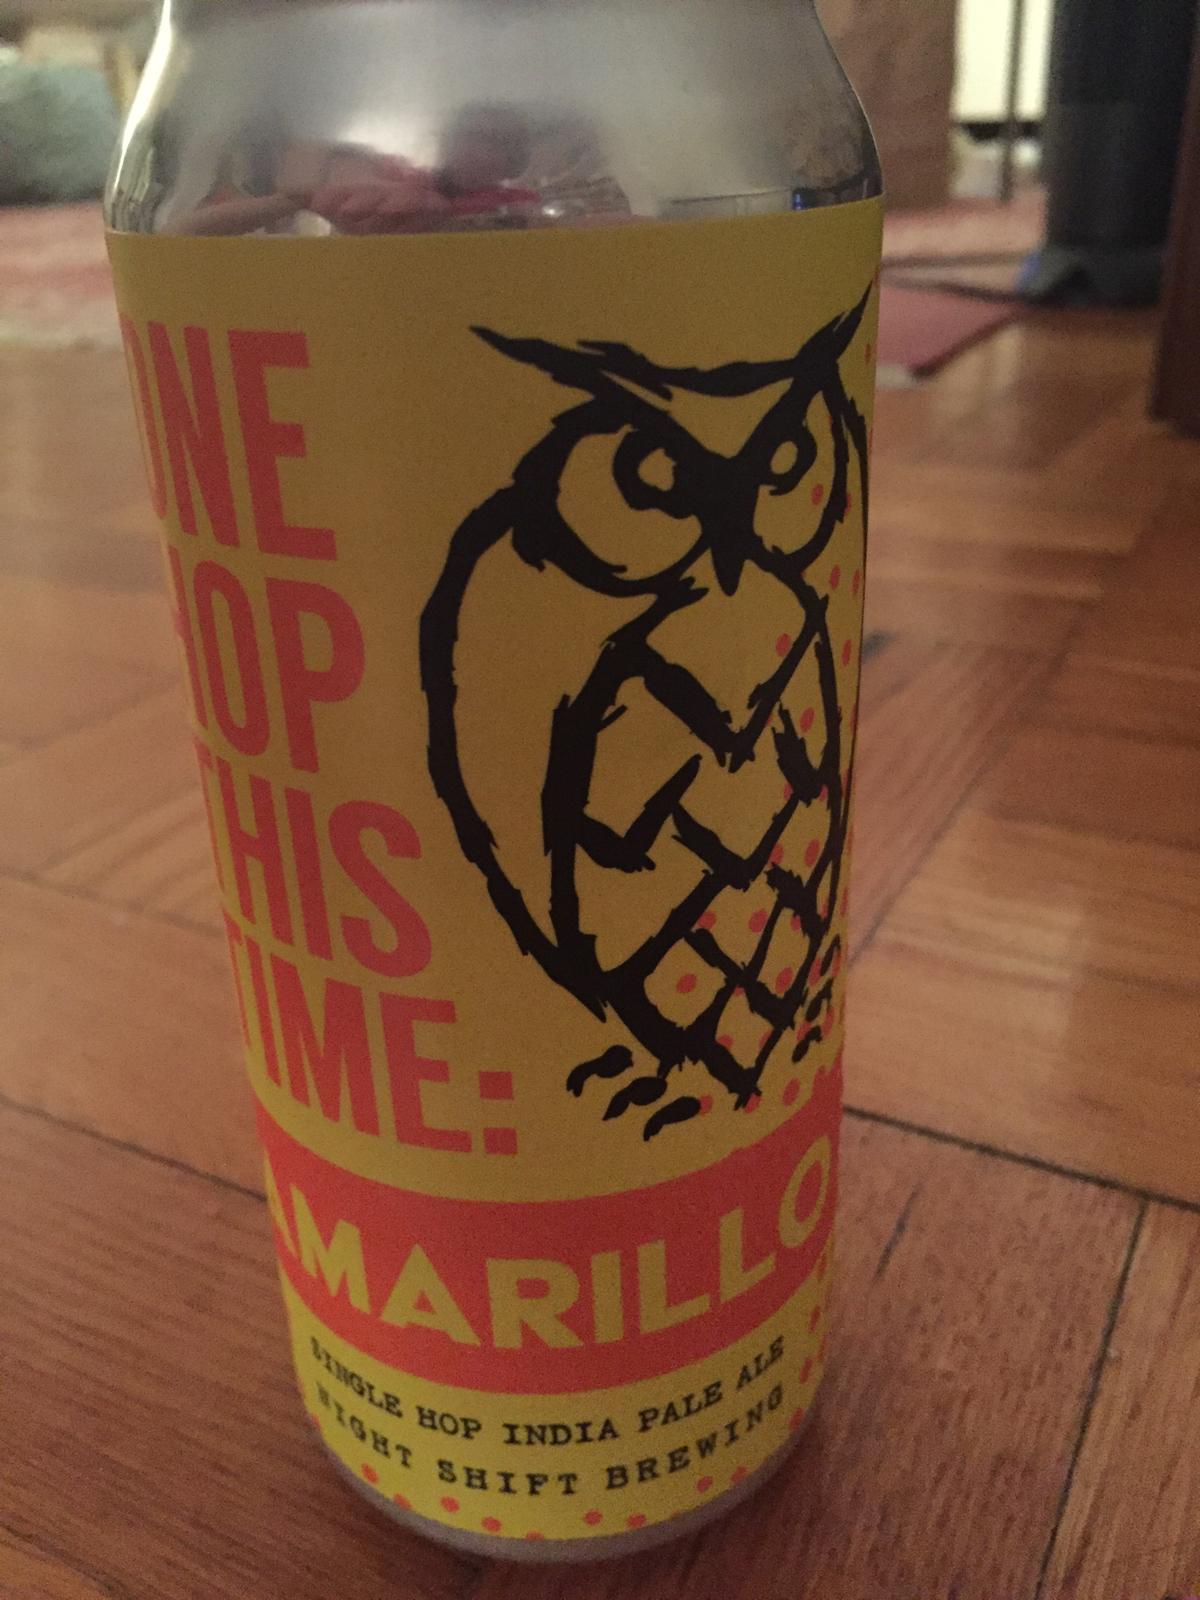 One Hop This Time: Amarillo